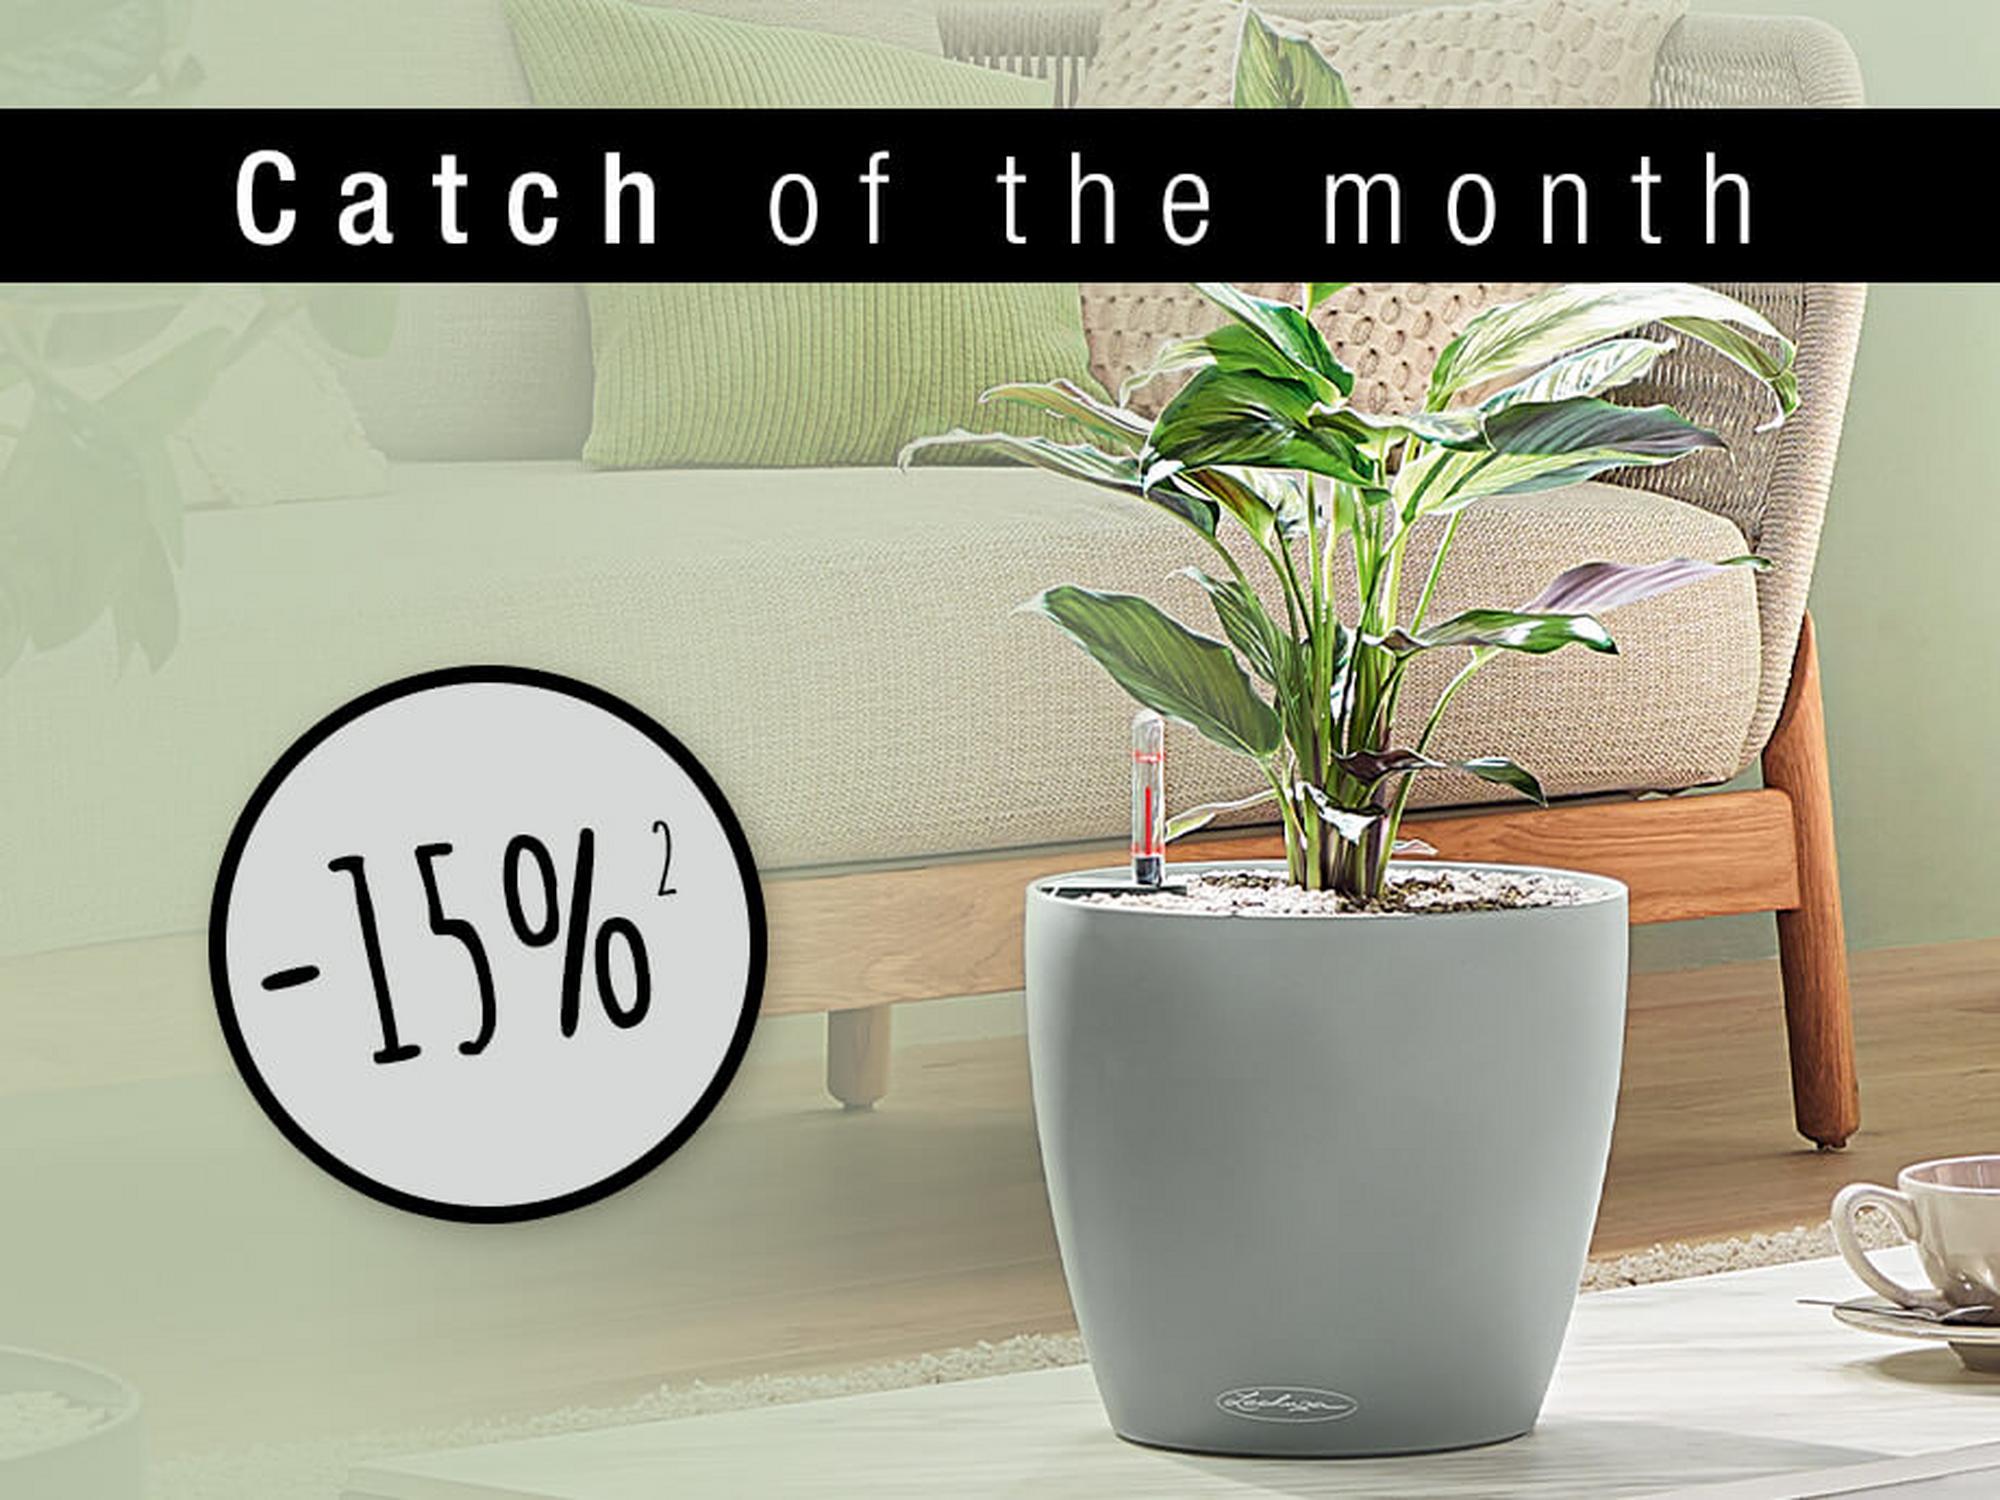 Catch of the month: 15% korting op CLASSICO Color ECO 35 lichtgrijs (Art.-Nr. 18930)